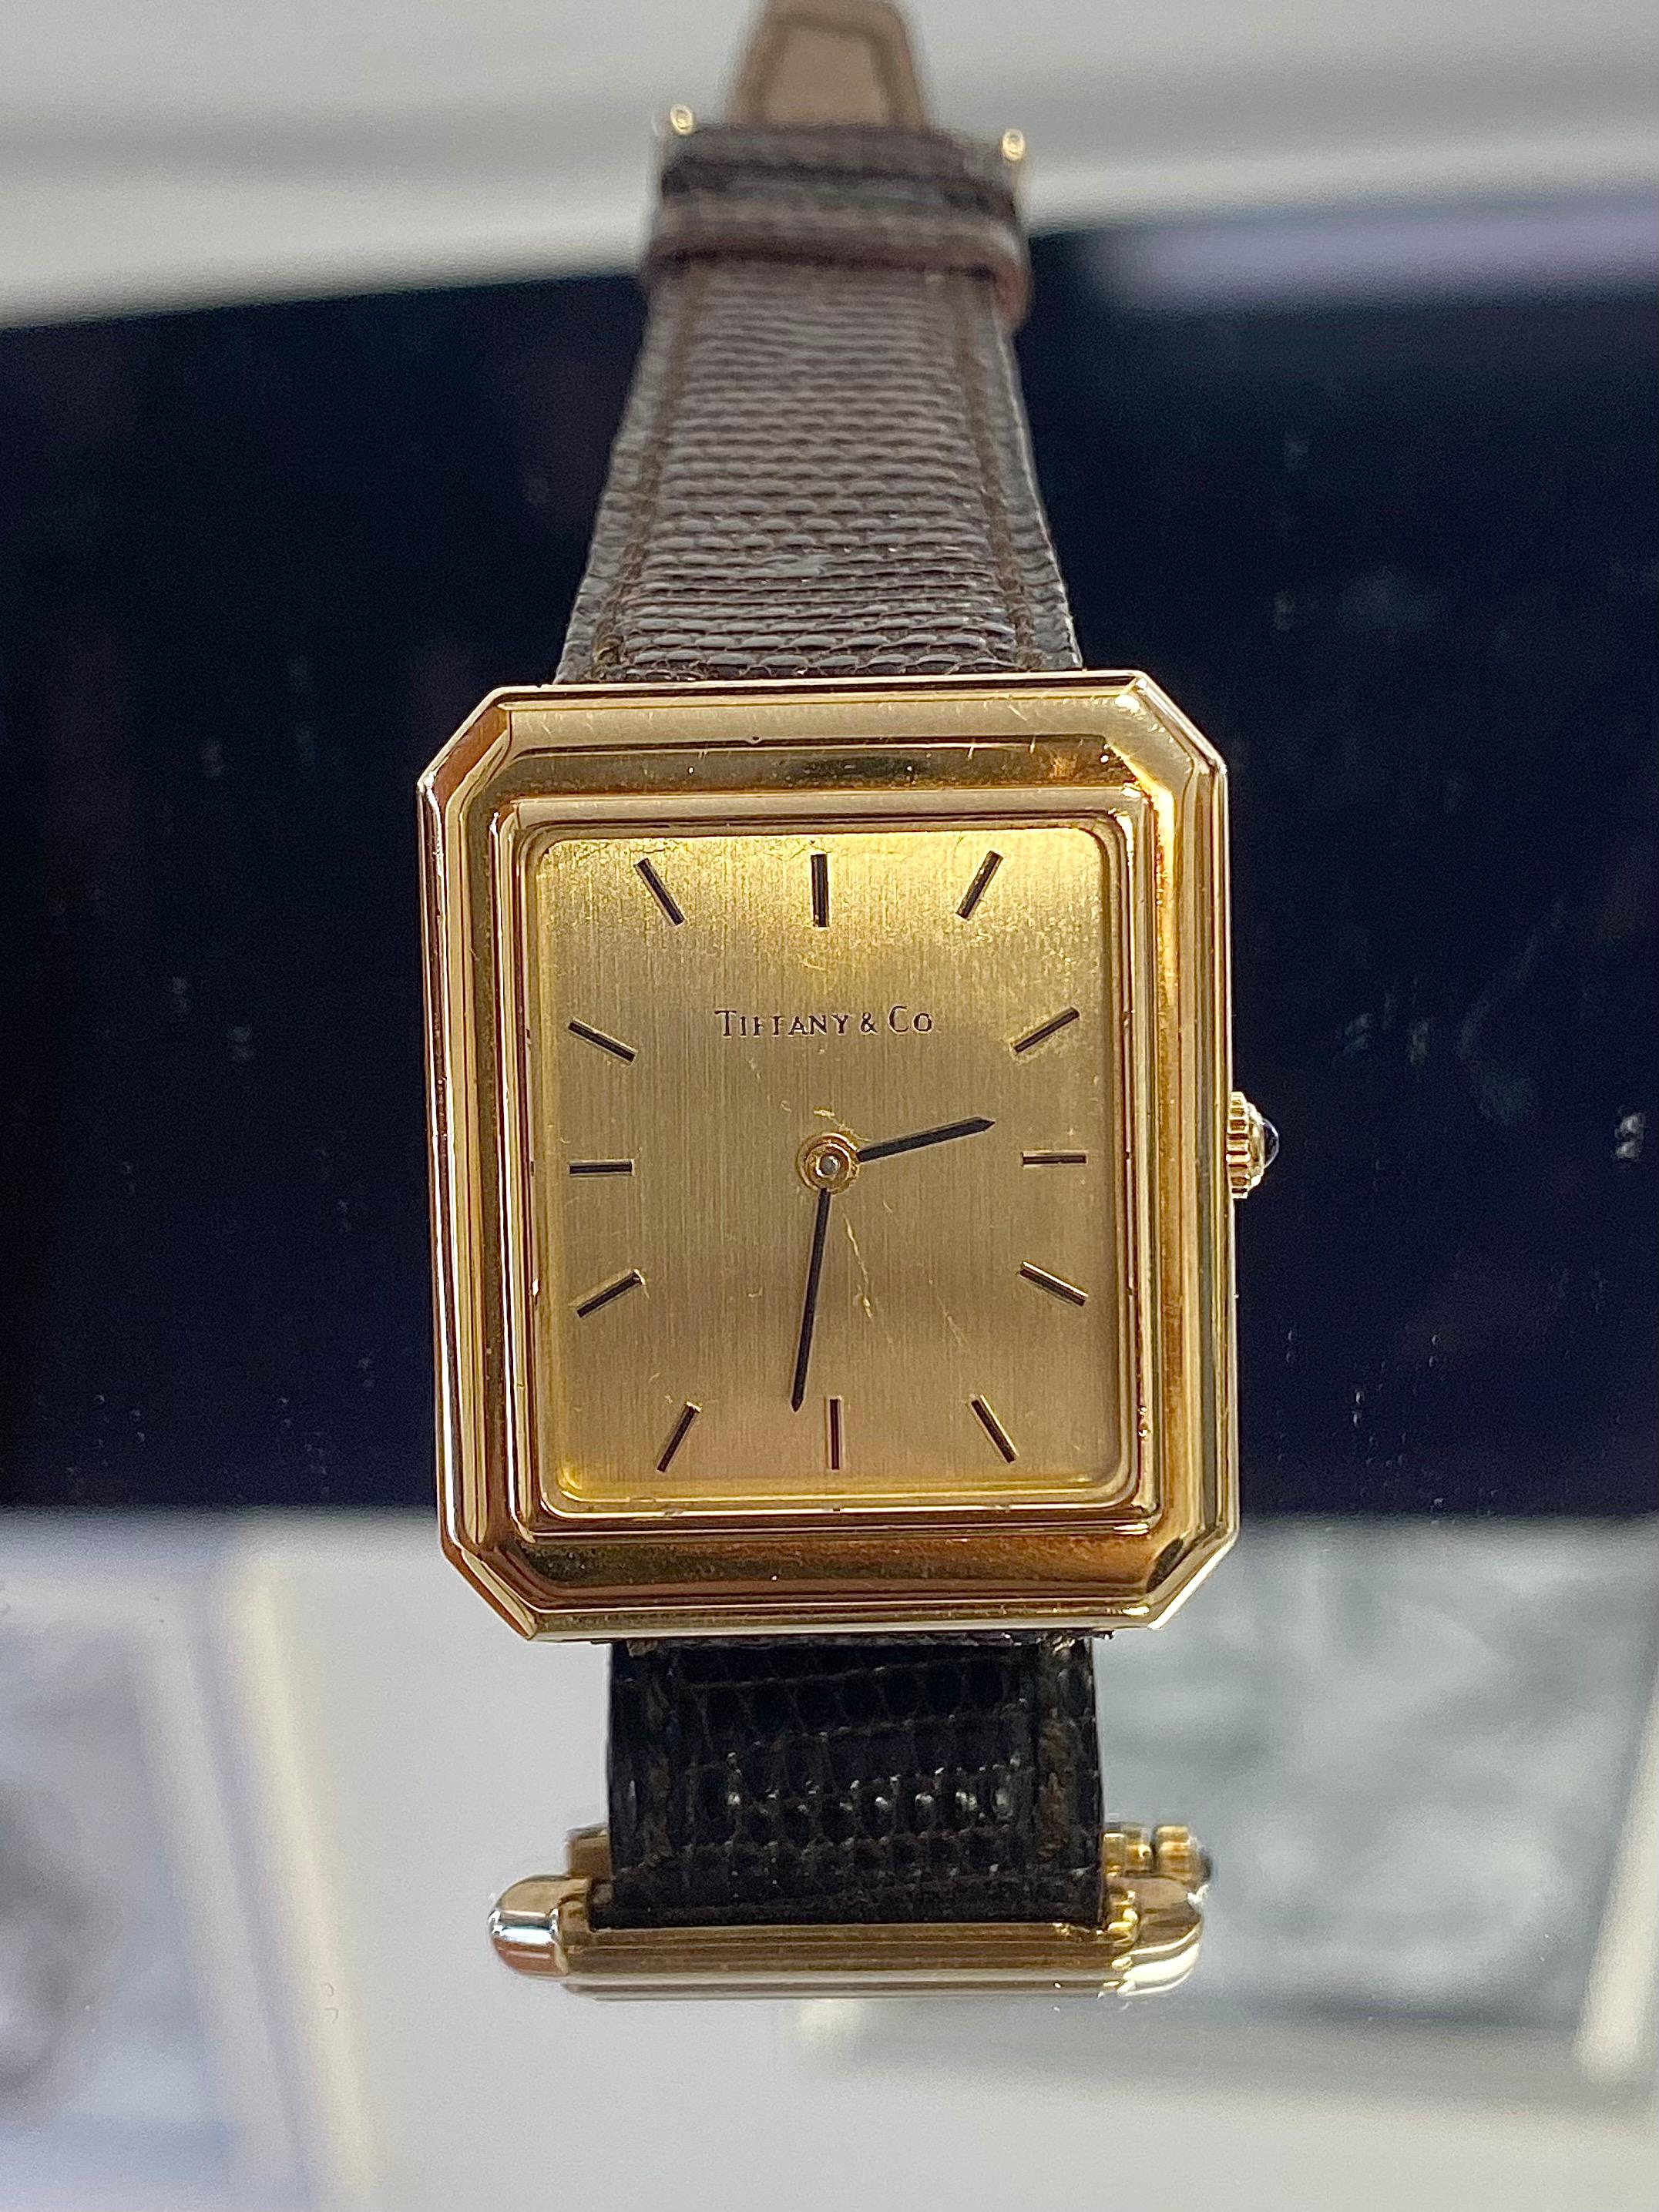 Classy and elegant Tiffany & Co. signed vintage wristwatch. This 18k solid gold and leather strap is for those in search of a classic and sleek timepiece. A watch for those who will appreciate the subtlety and grace of the piece. This is such a